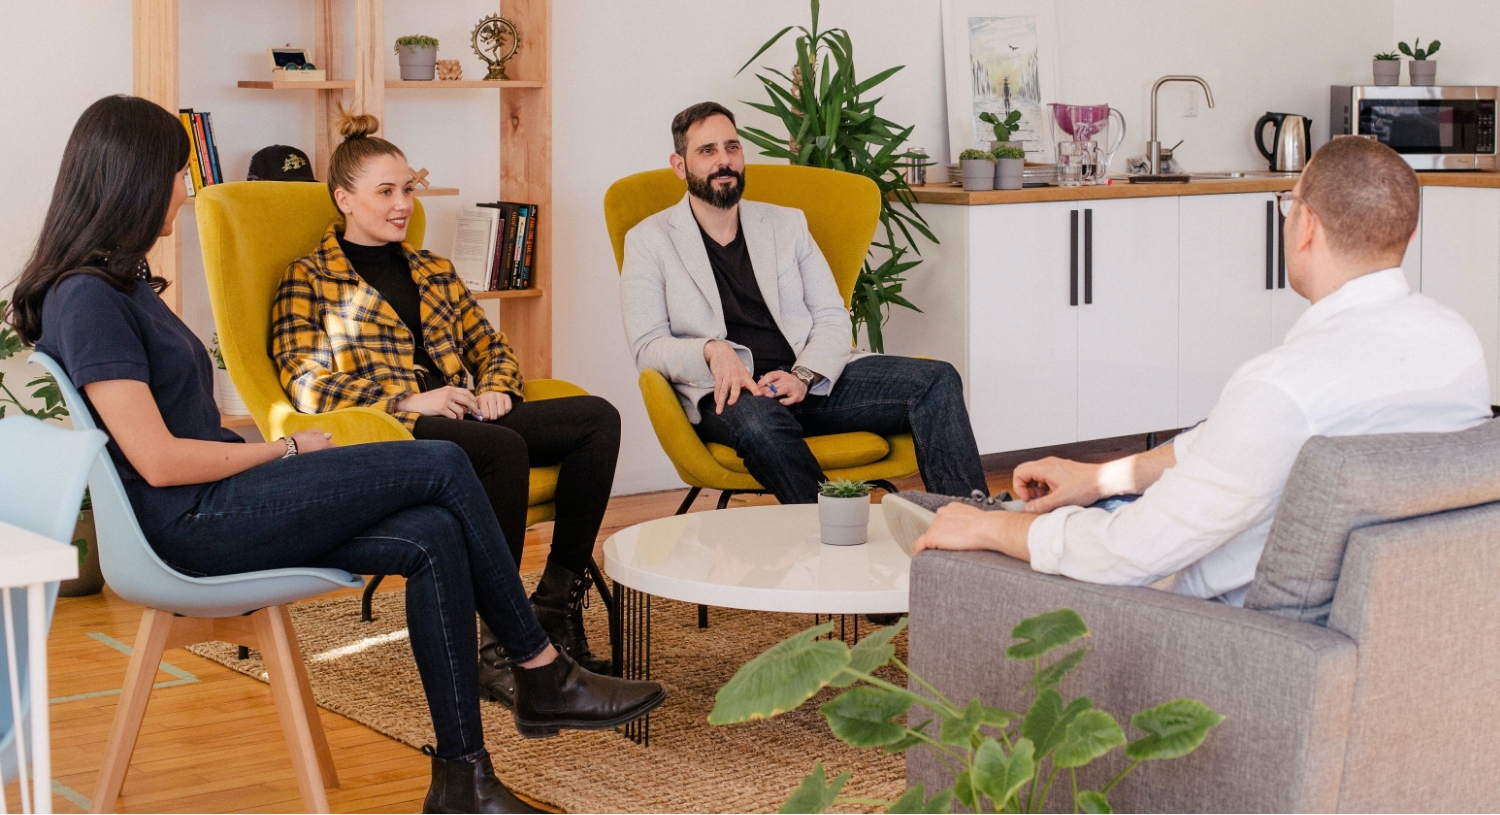 Four people sat in comfy chairs around a small coffee table in an office environment talking